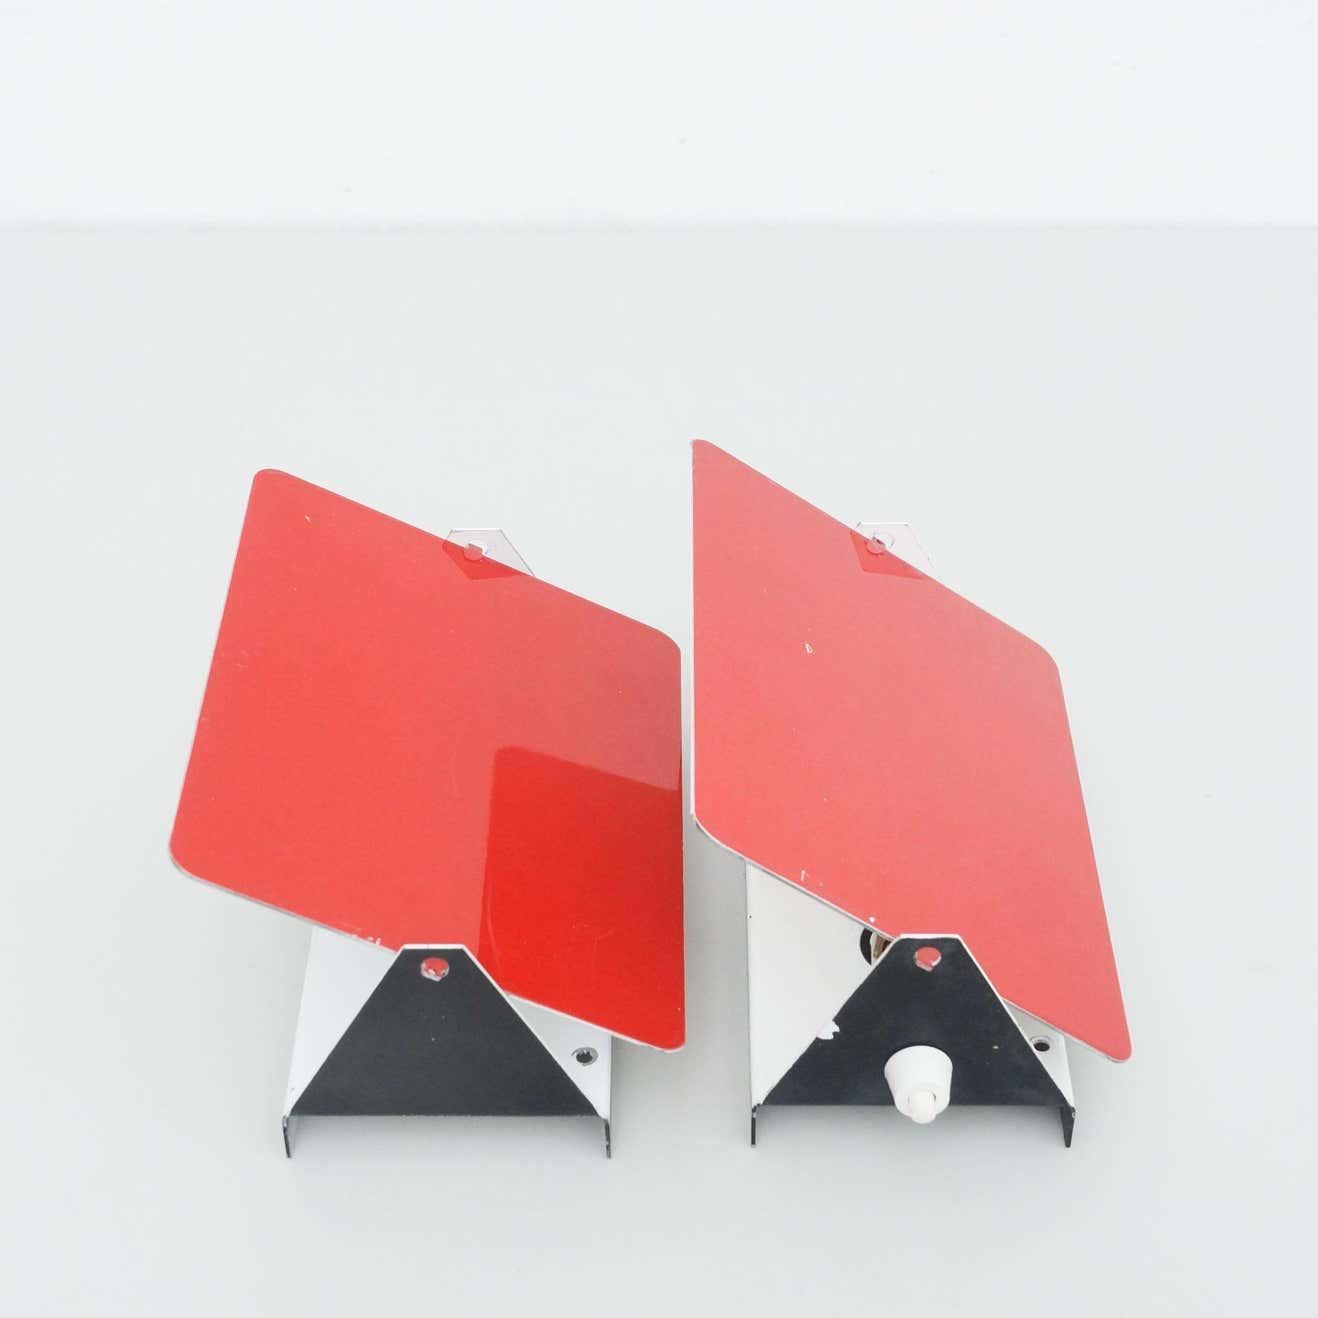 Pair of Charlotte Perriand, Mid-Century Modern Red Metal Cp-1 Wall Light, 1960 For Sale 8